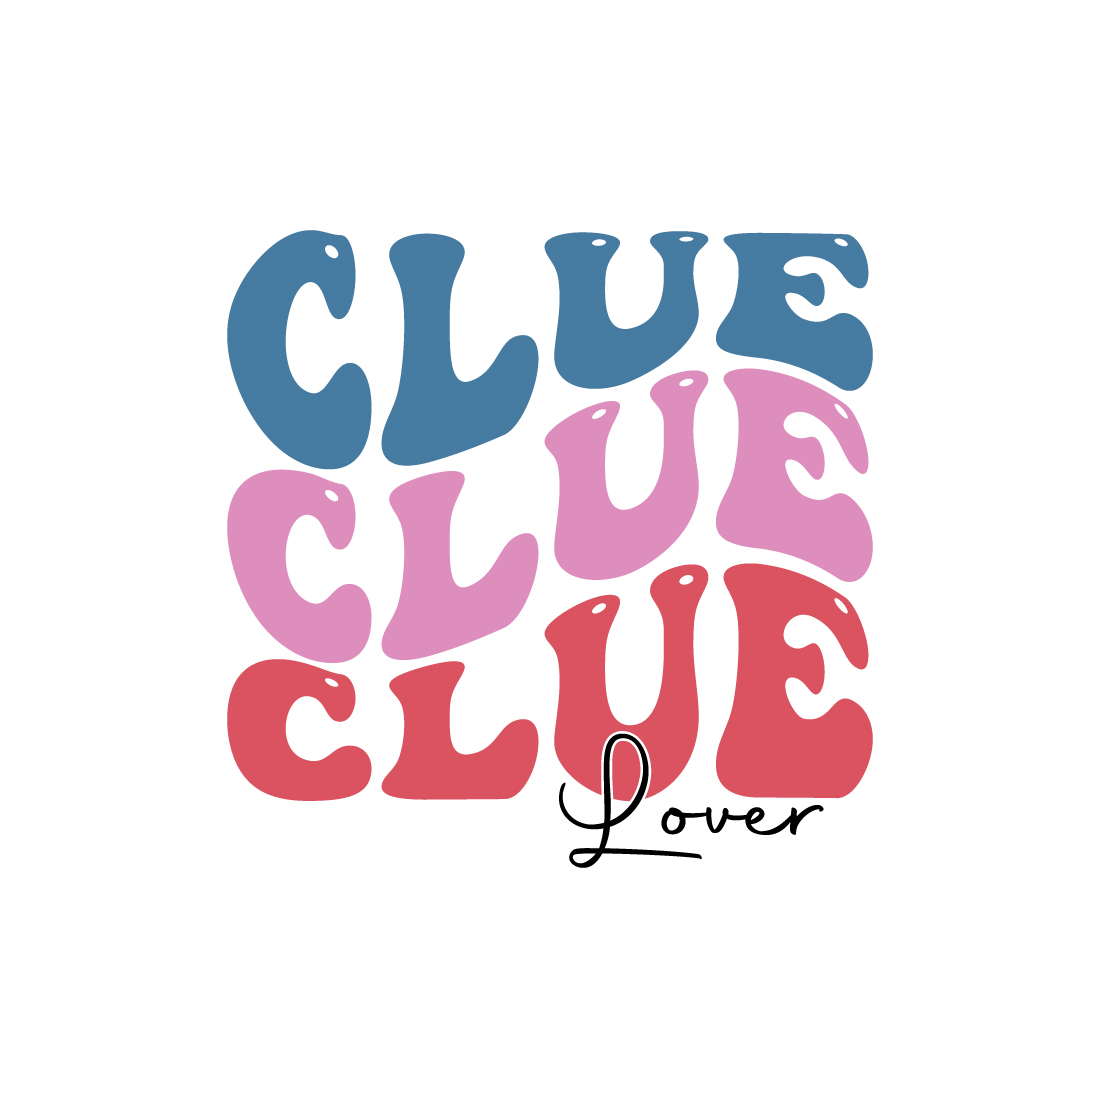 Clue lover indoor game retro typography design for t-shirts, cards, frame artwork, phone cases, bags, mugs, stickers, tumblers, print, etc preview image.